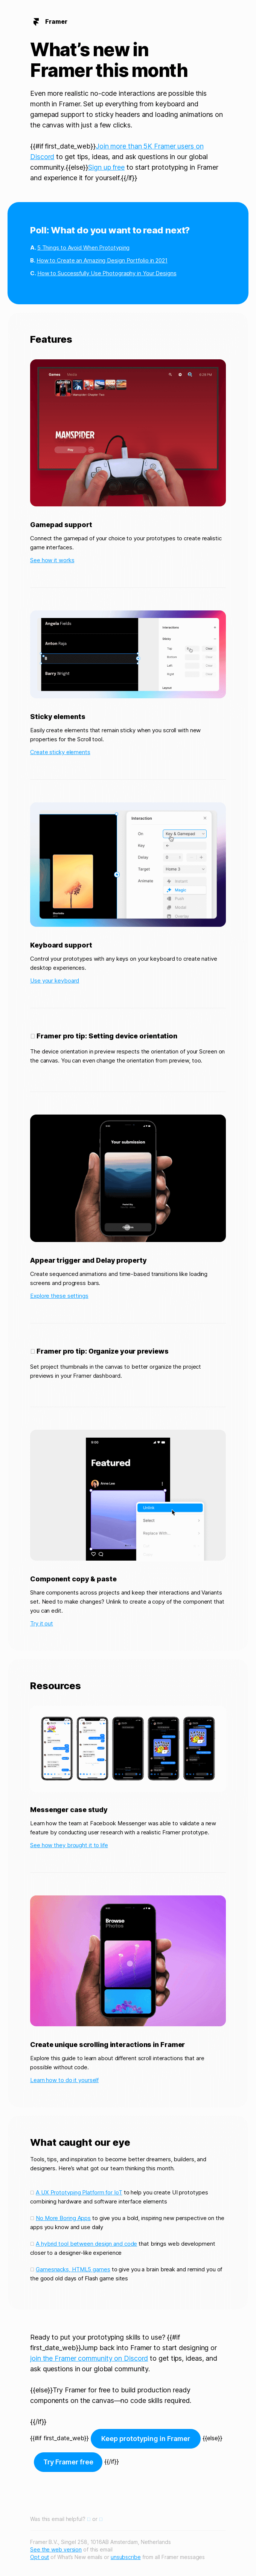 What’s new: Powerful prototyping with sticky elements, more scrolling options, and key and gamepad support - Framer Email Newsletter